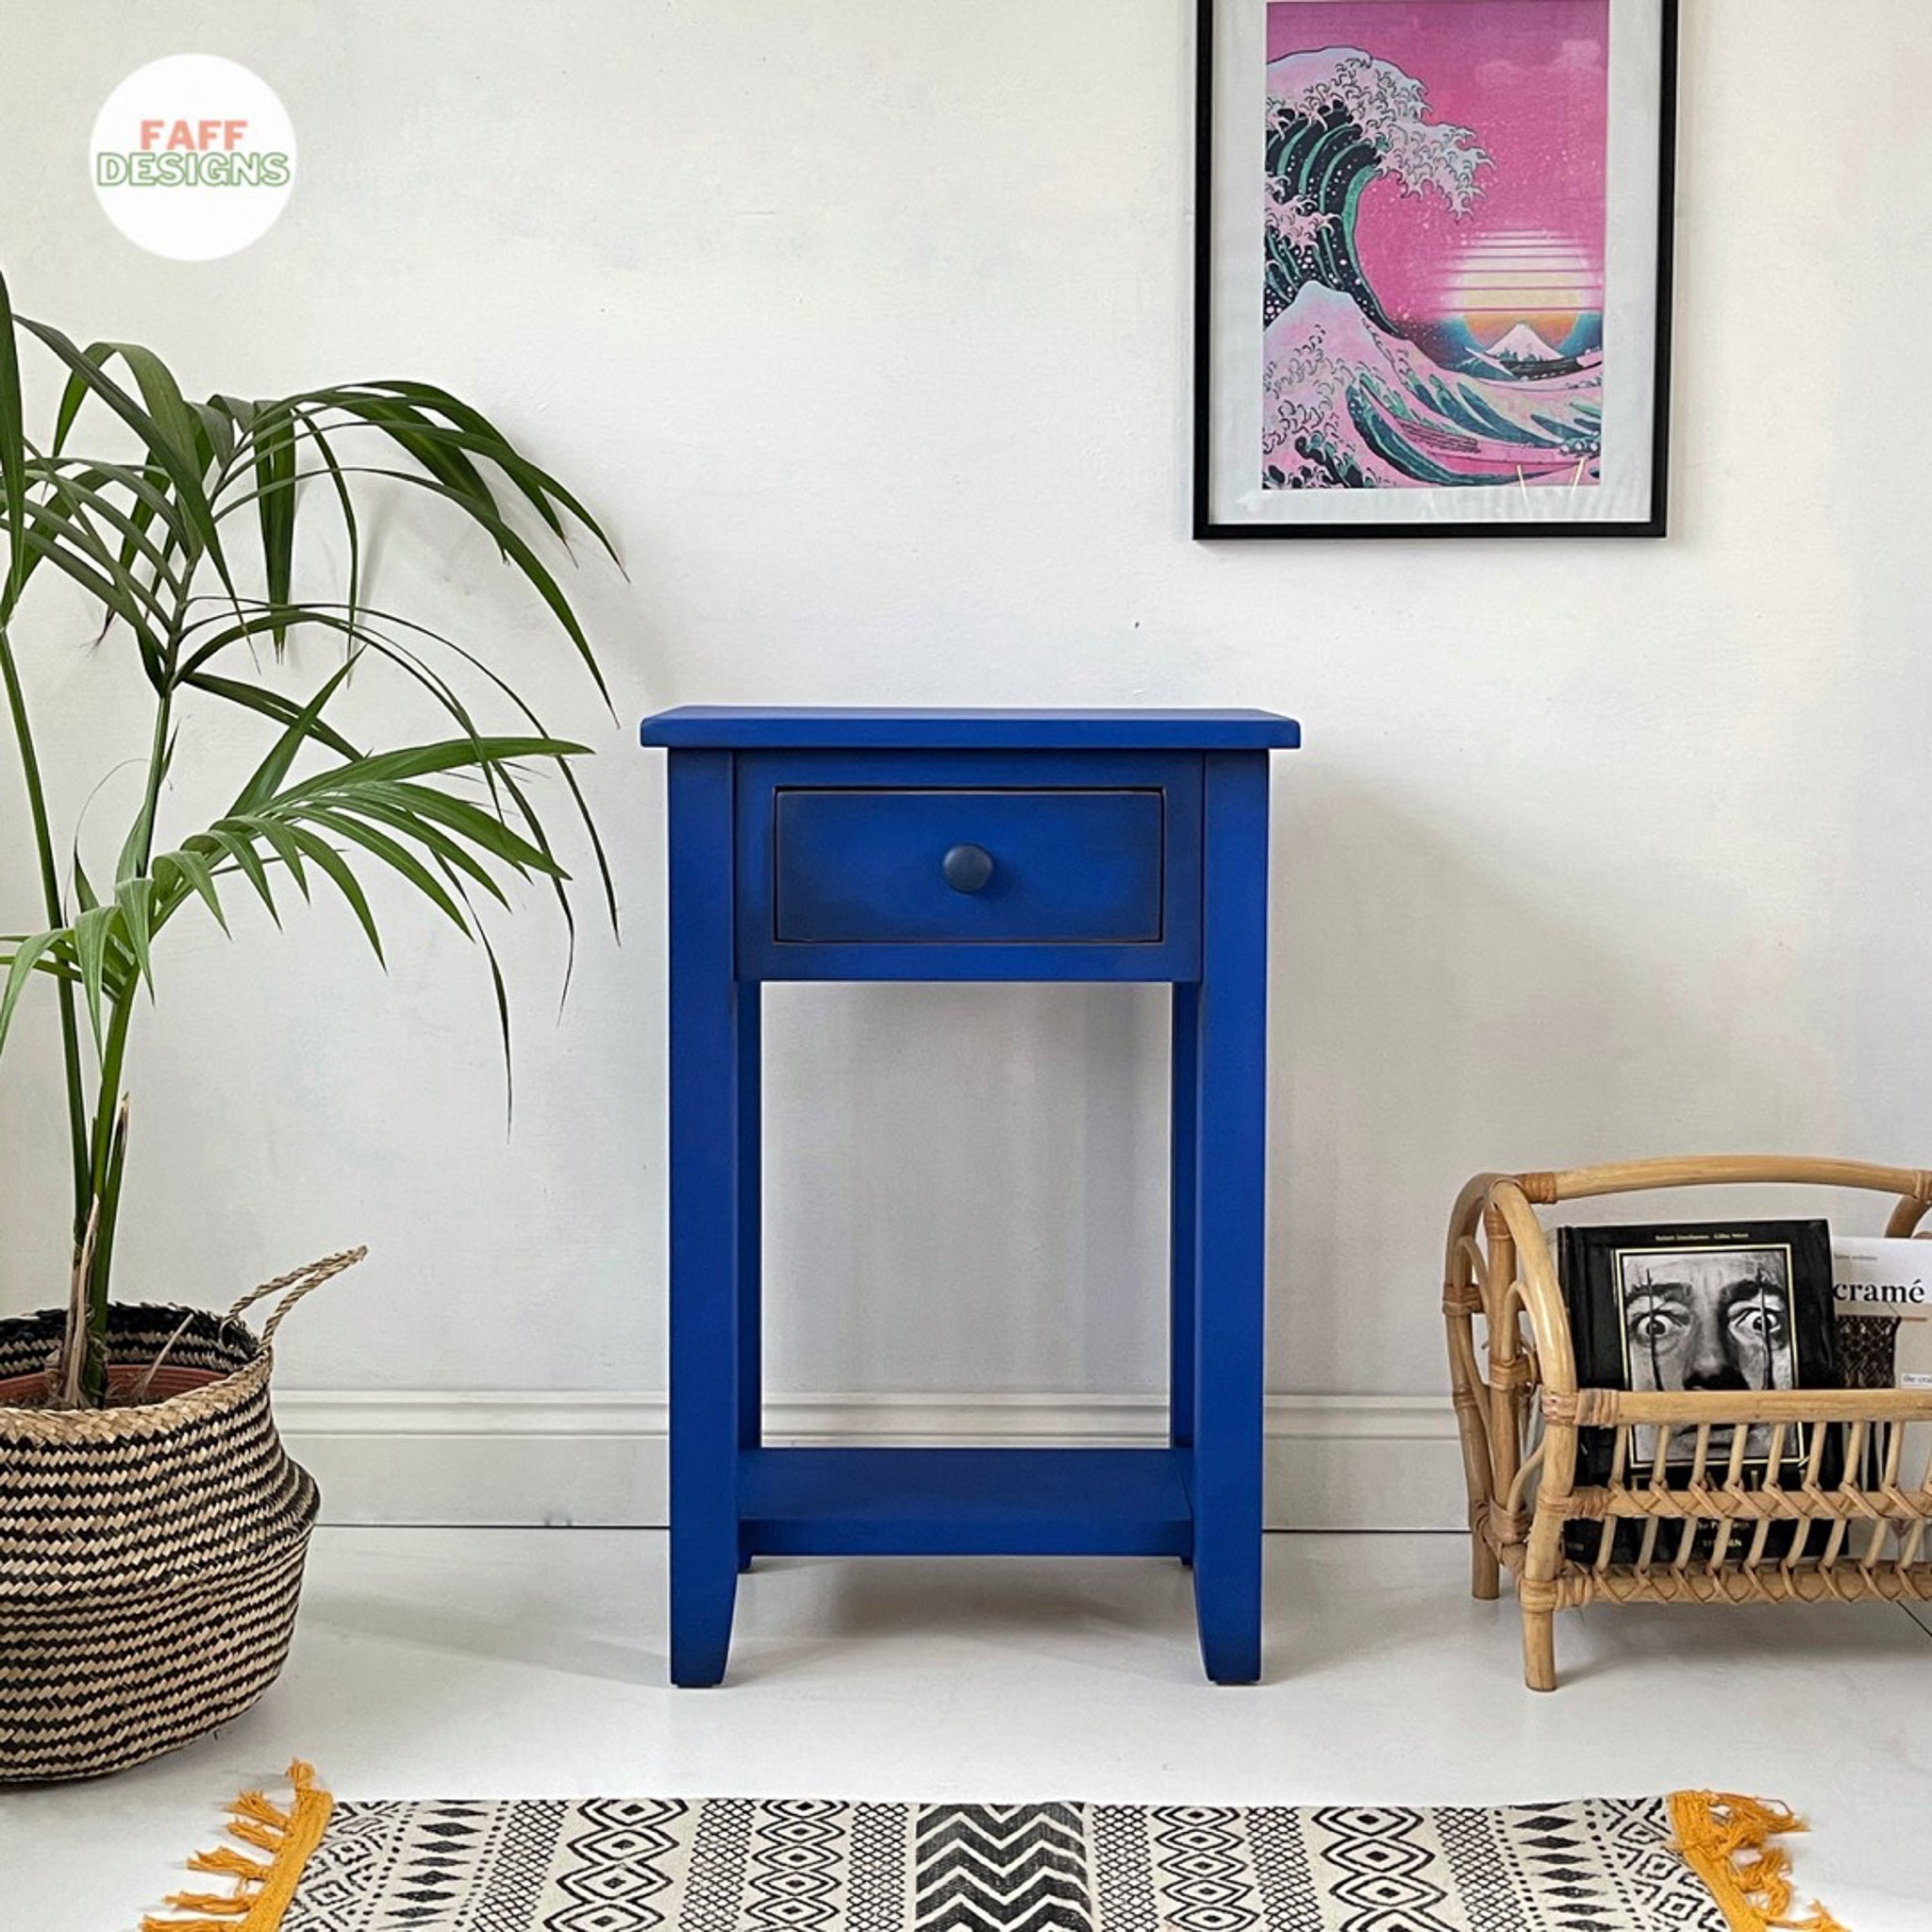 An end table refurbished by Faff Designs is painted in Dixie Belle's Cobalt Blue chalk mineral paint.